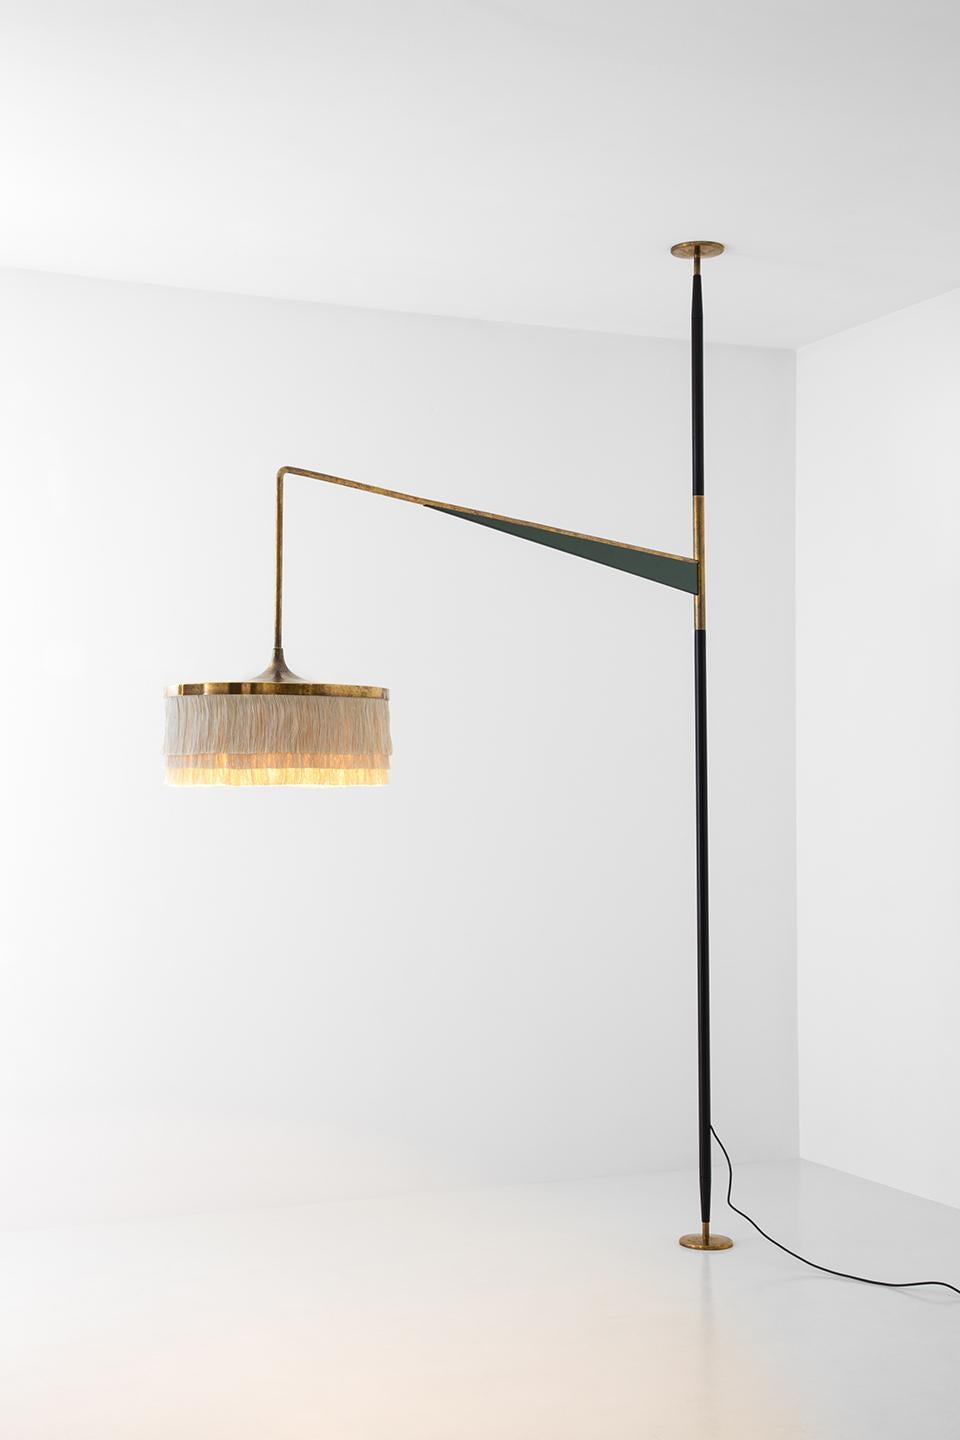 Floor/ceiling lamp in matte black and semigloss green painted metal.
Lampshade and detailing in oxidized brass. Silk fringes.
Dimoremilano by Dimorestudio
Code: Lampada 027 
22% VAT WILL BE ADDED ON EUROPEAN ORDERS